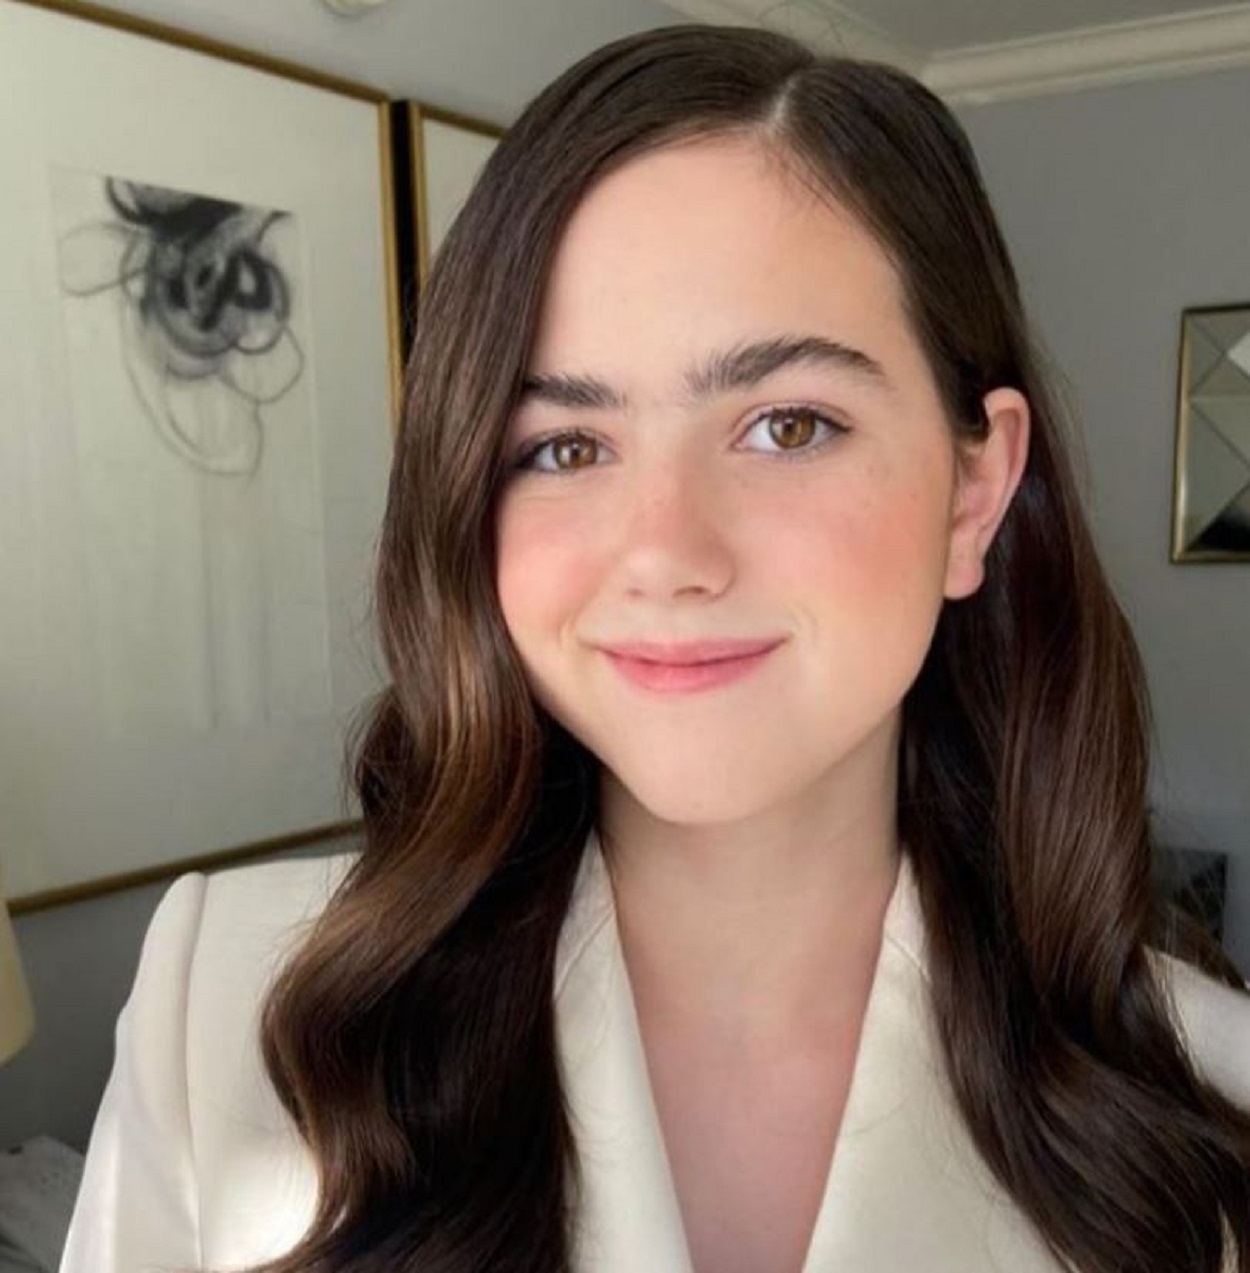 Abby Ryder Fortson Age, Parents, Height, Birthday, Biography, Net Worth